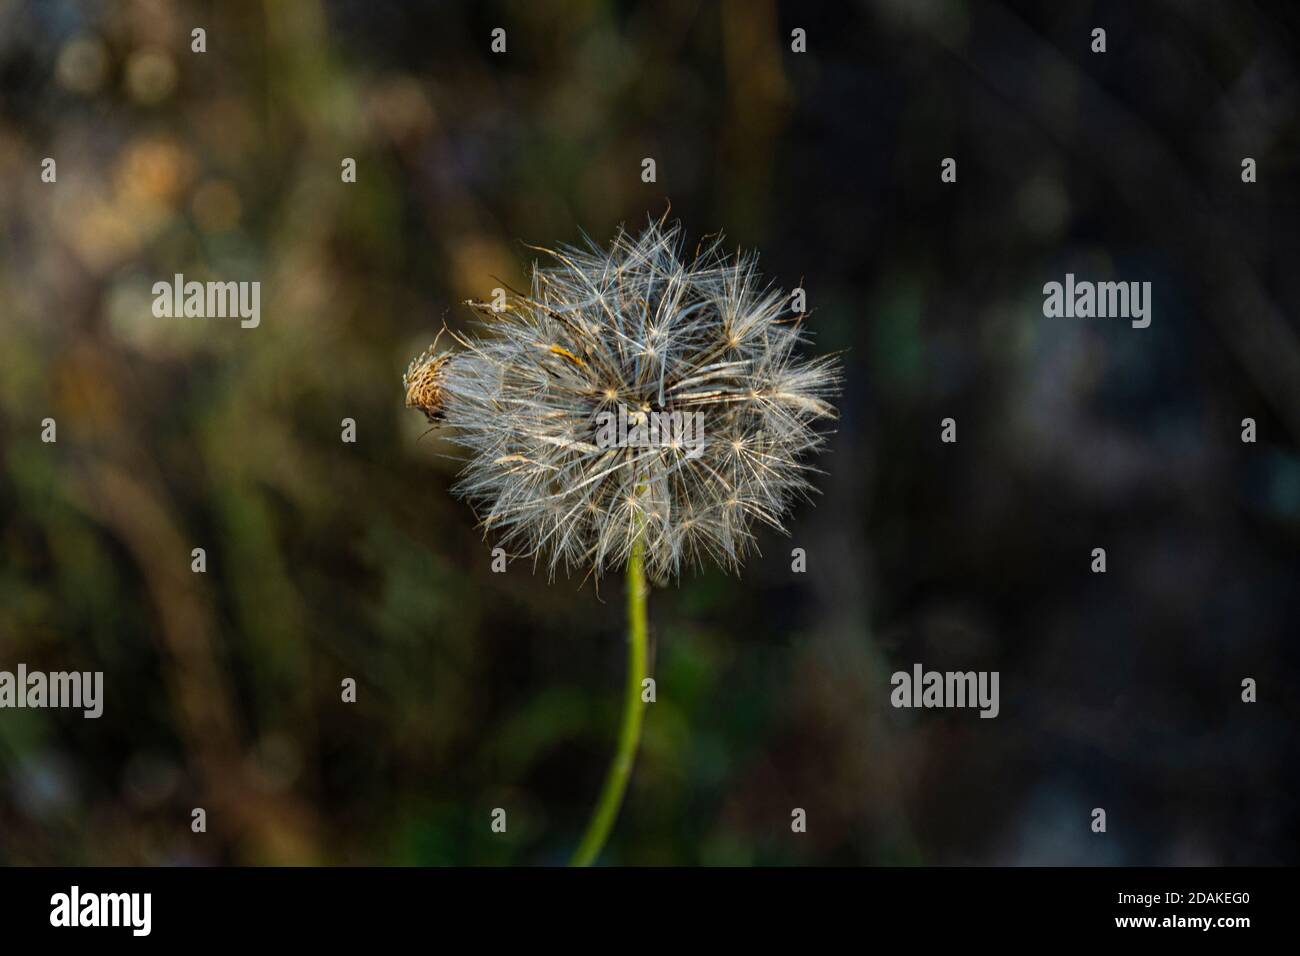 closeup of a dandelion on an unfocused background Stock Photo